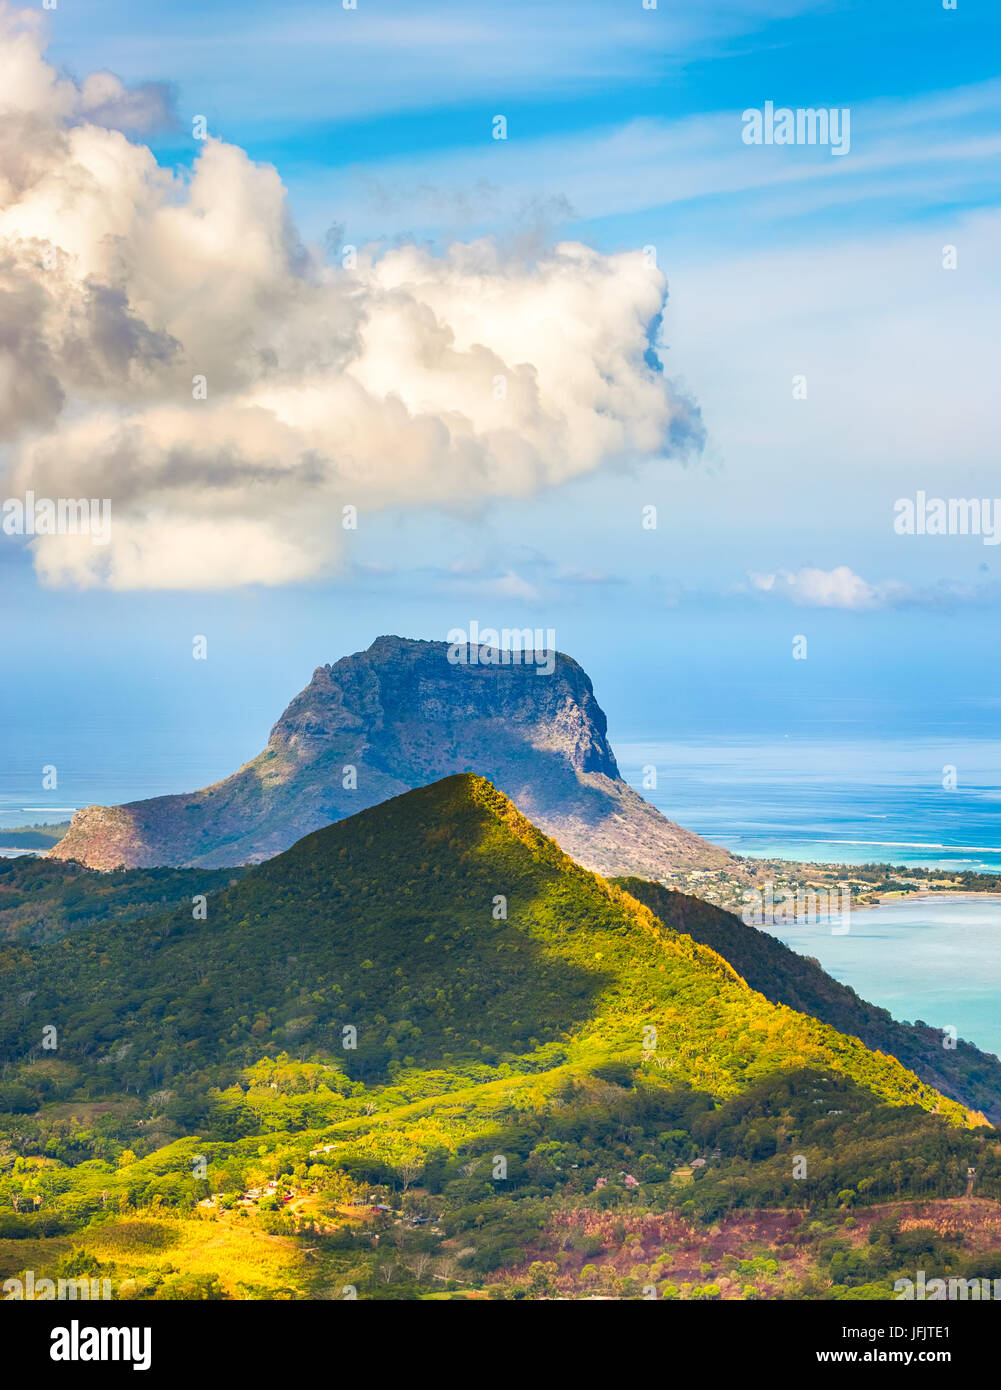 View from the viewpoint. Mauritius. Stock Photo